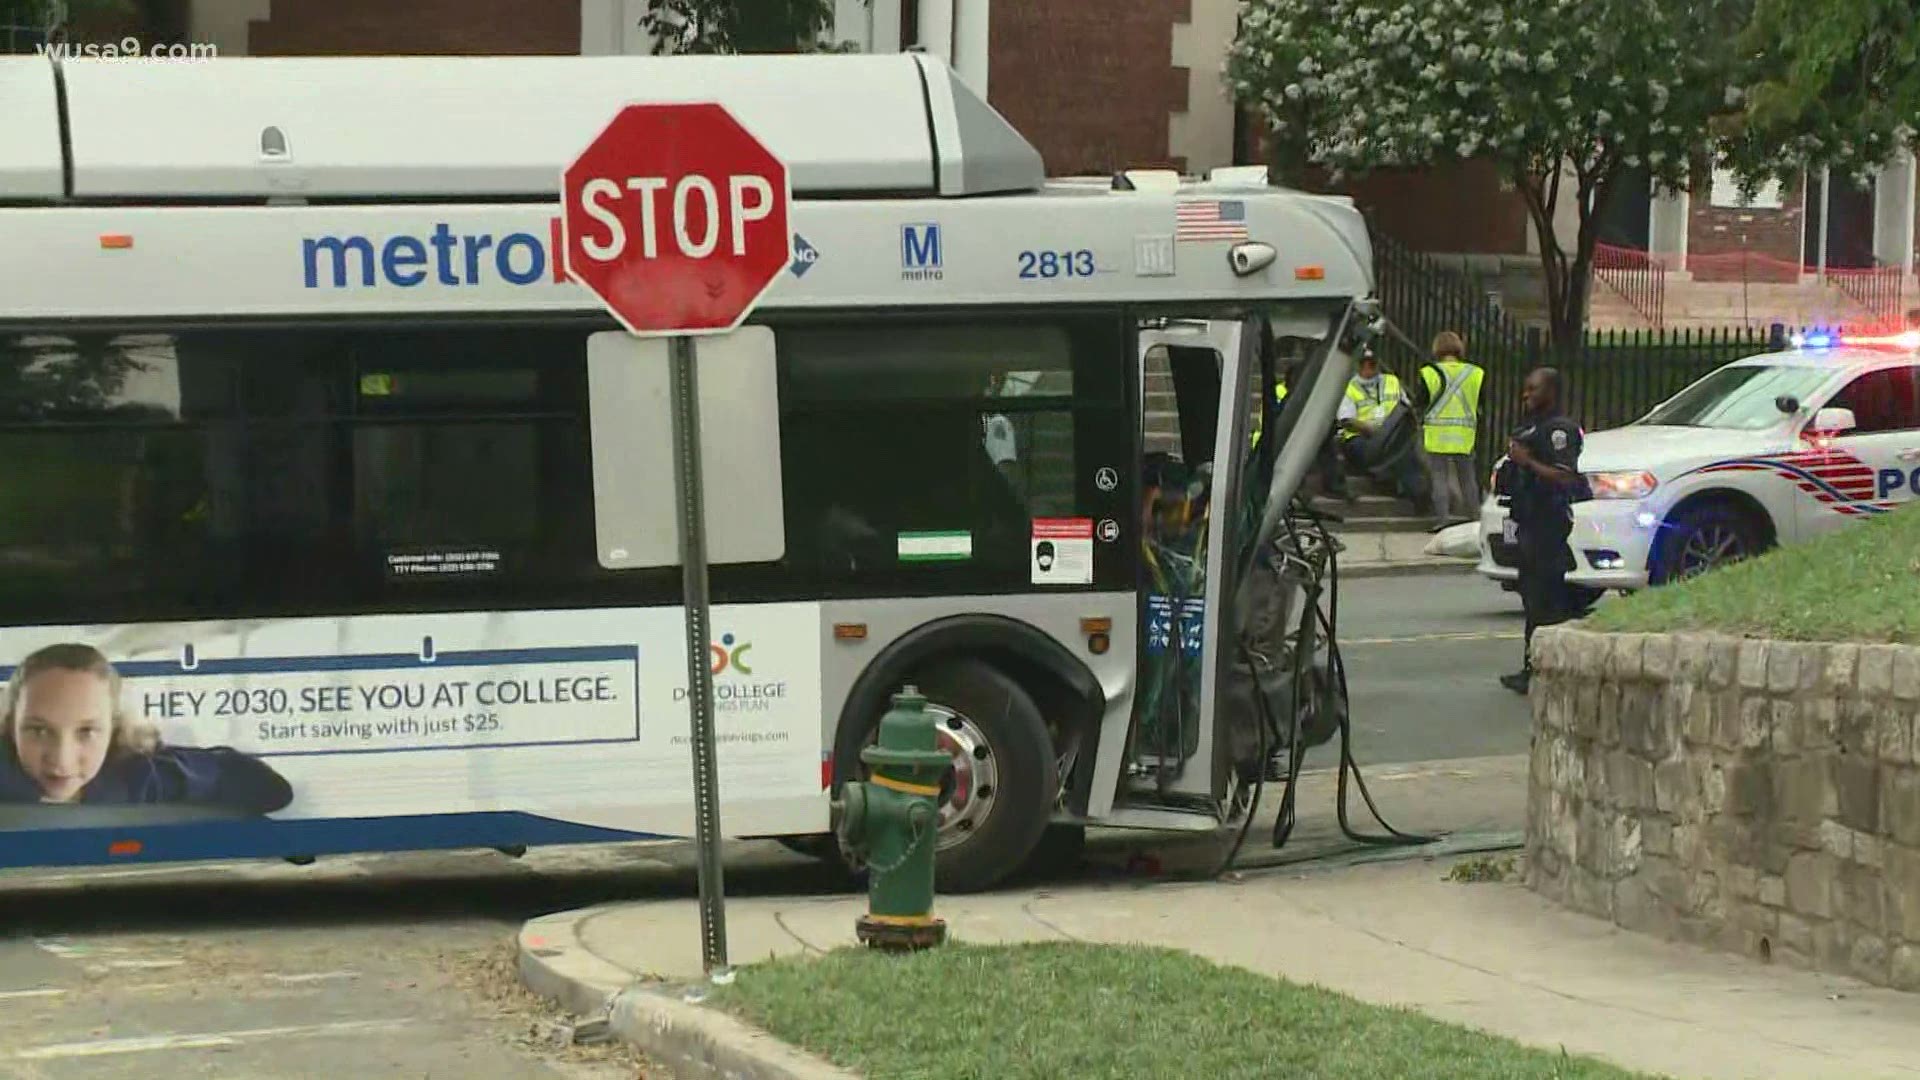 The Metrobus shuttle crashed after hitting a retaining wall, at the intersection of First Street and Riggs Road Northeast, according to D.C. Police.